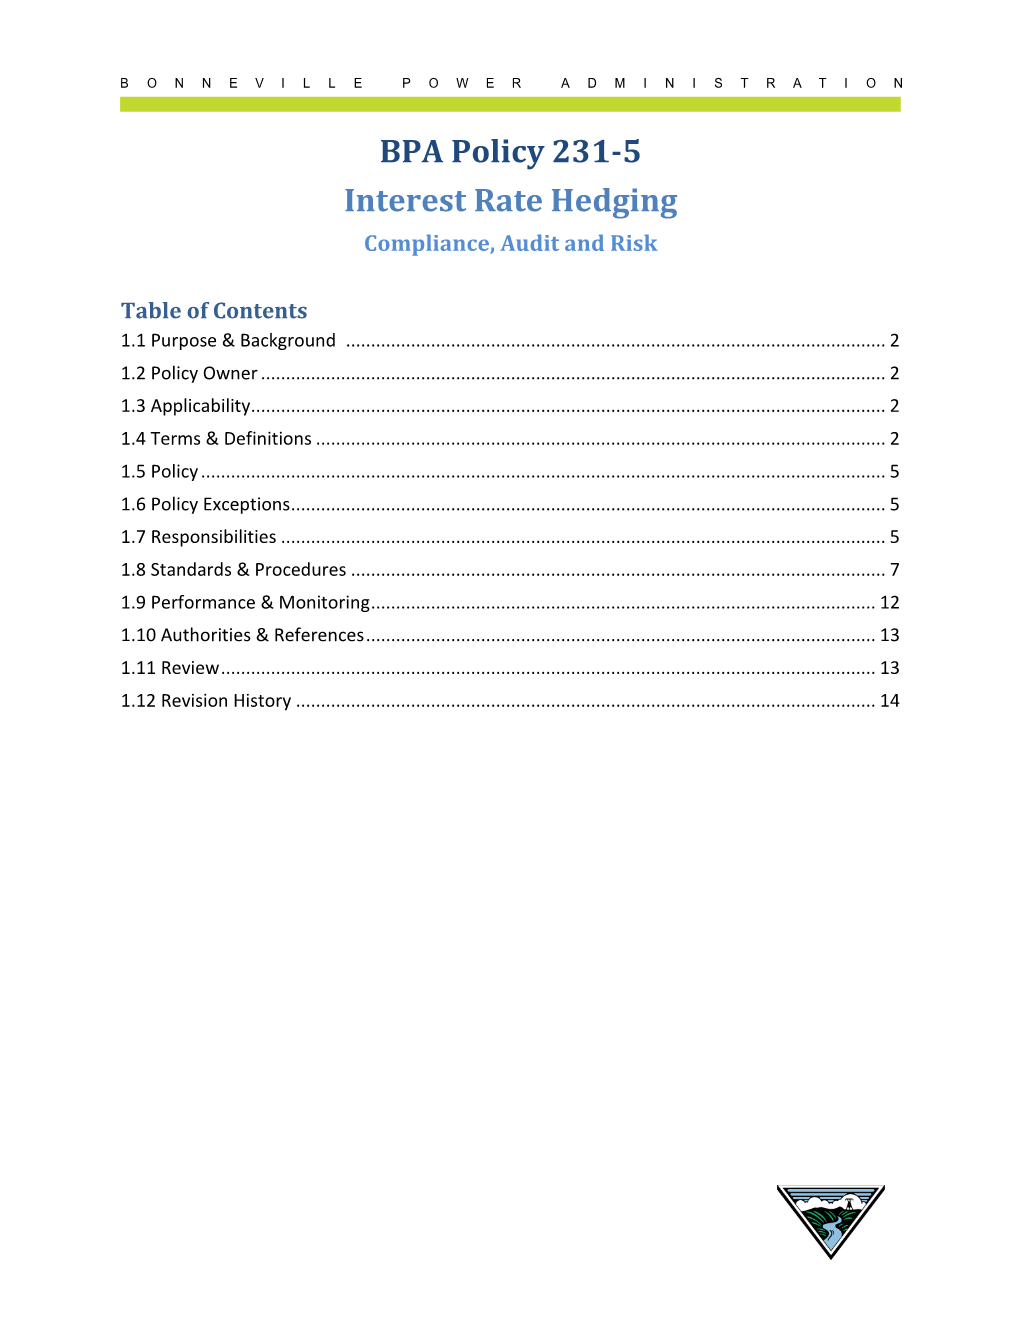 Interest Rate Hedging Compliance, Audit and Risk